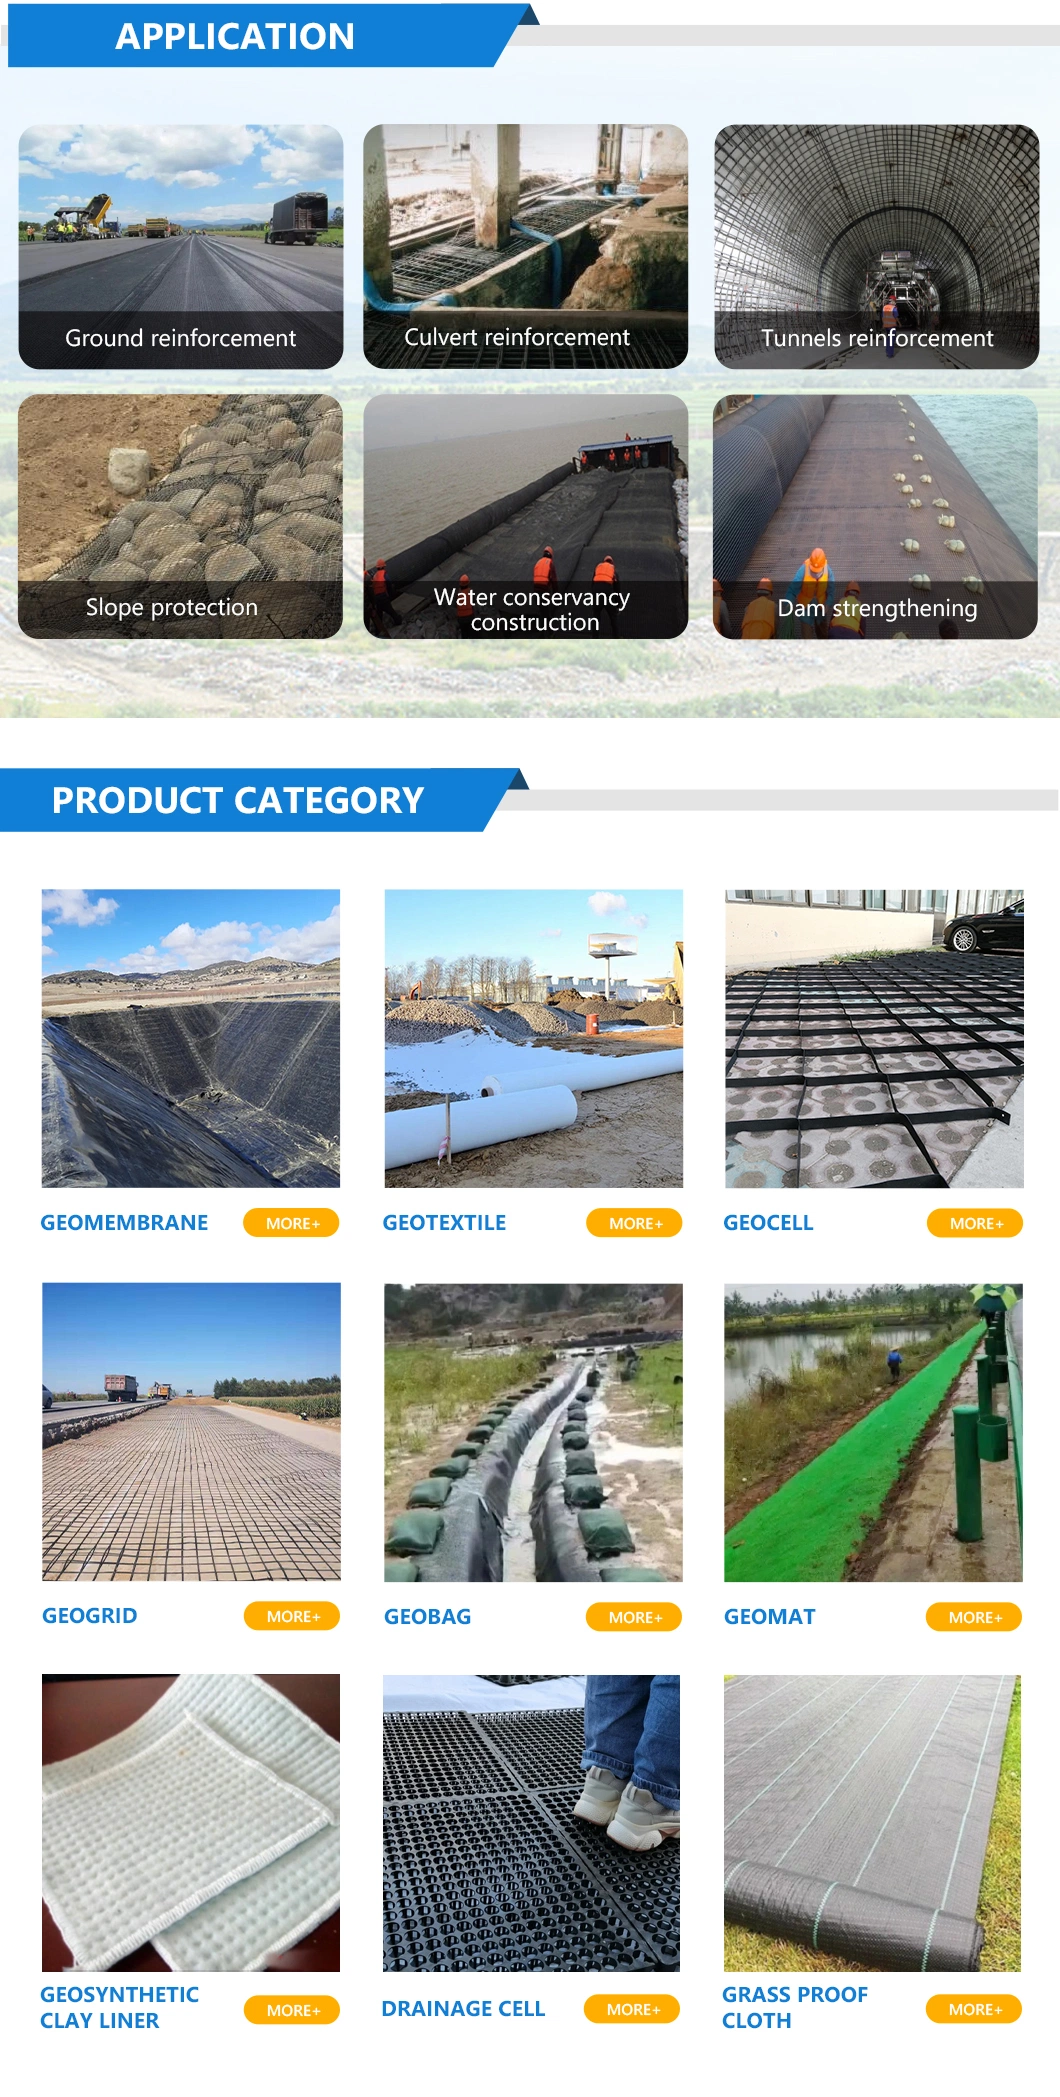 China Fiberglass/Polyester Biaxial Geogrid/PP Polyester Uniaxial Geogrid/Plastic/Mining/Steel-Plastic Geogrid Manufacturer